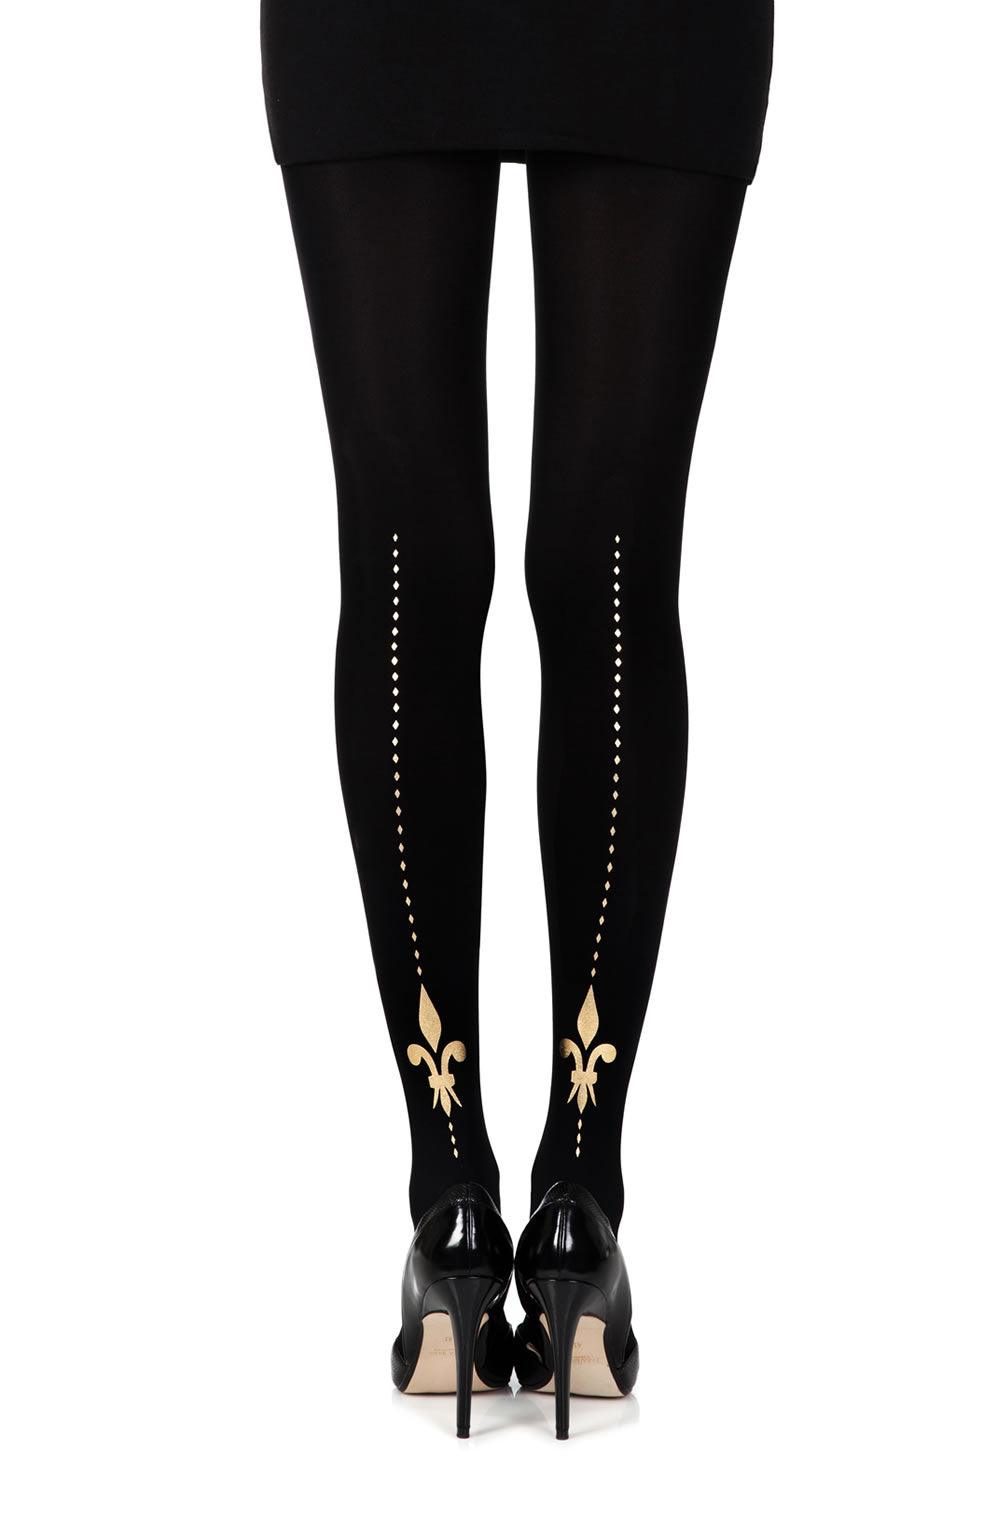 Zohara "Lily Of The Valley" Black Print Tights - Sydney Rose Lingerie 